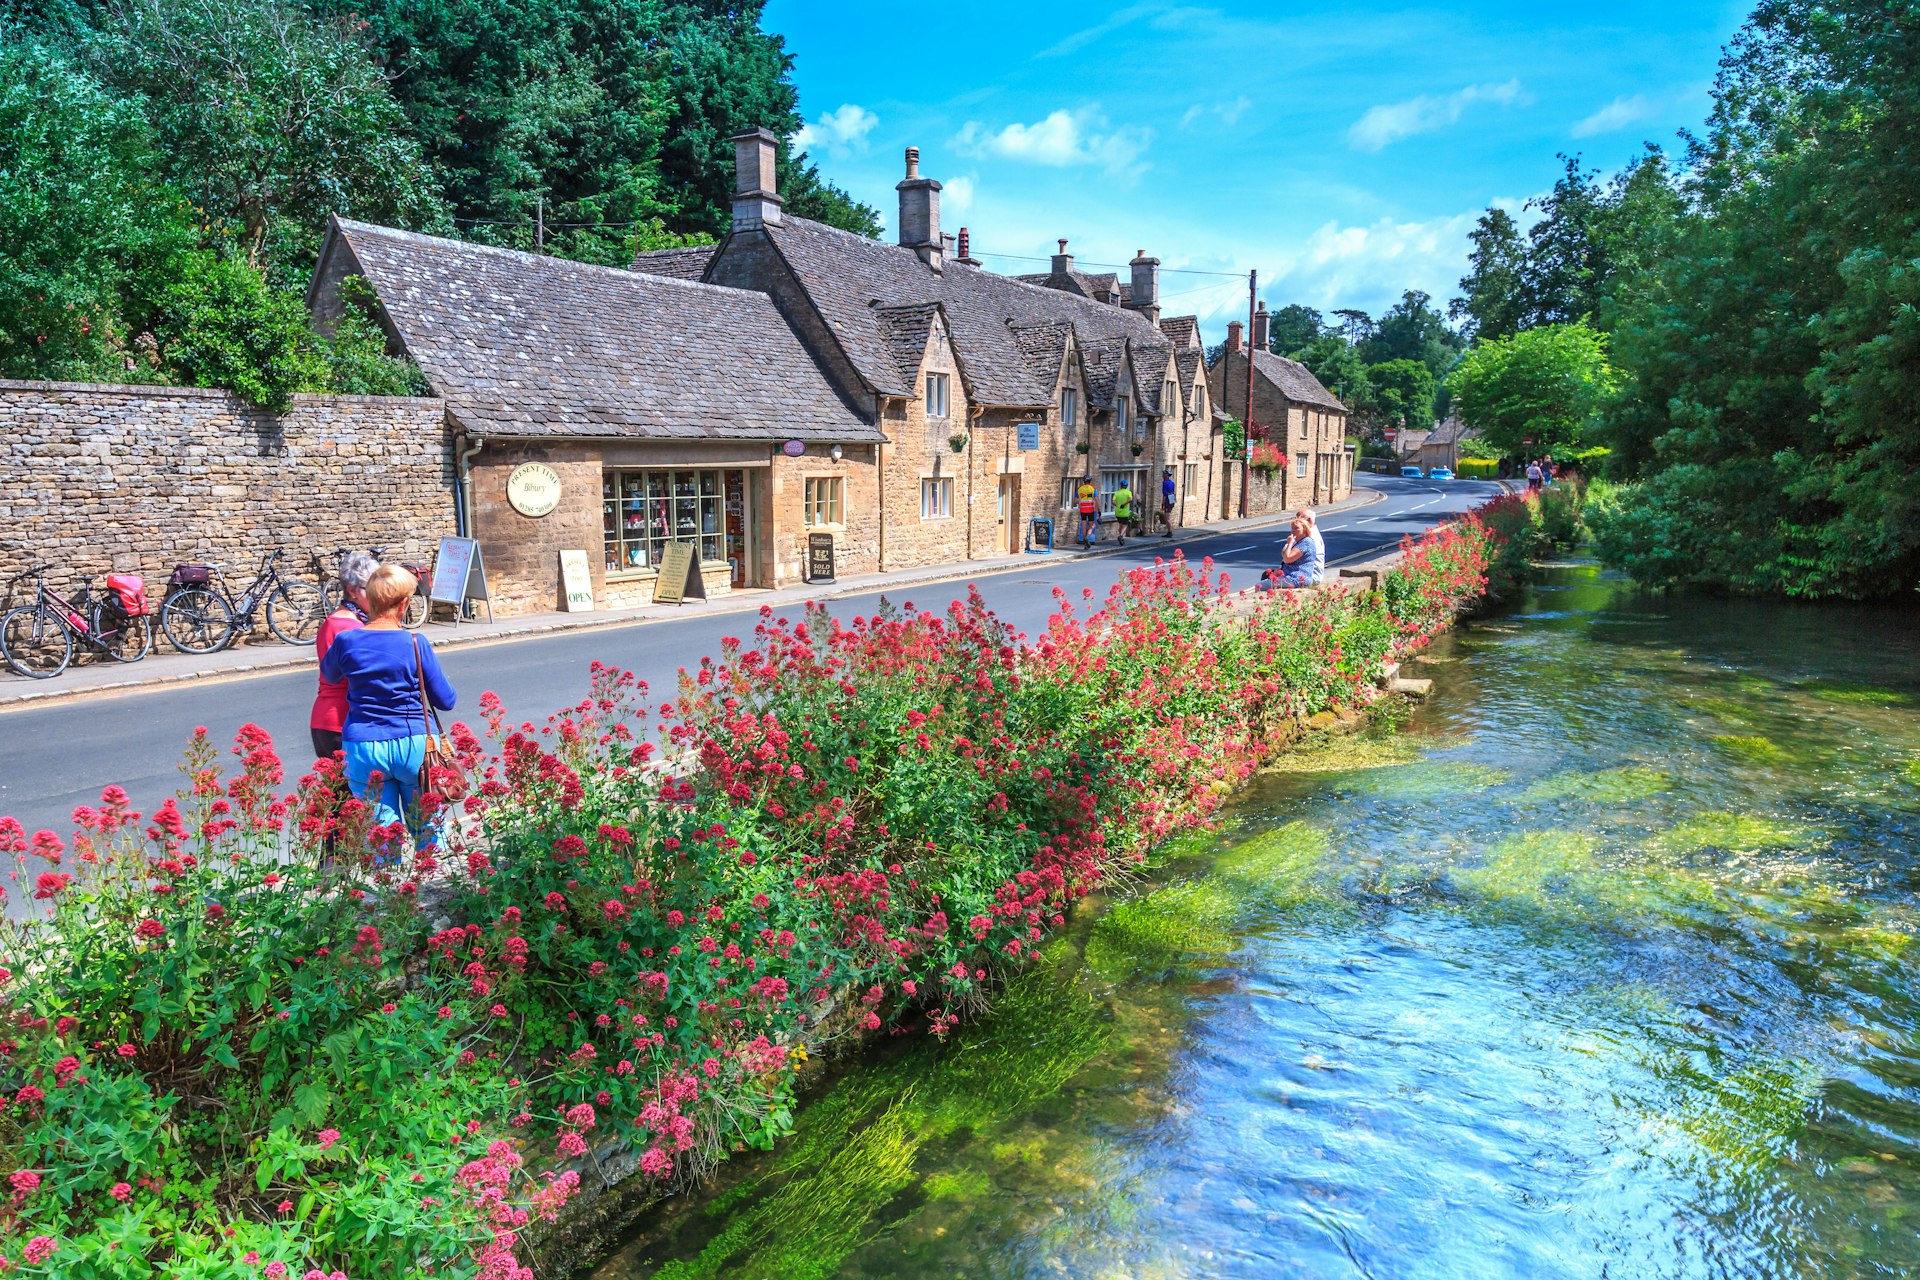 A pretty row of honey-colored cottages opposite a picturesque stream